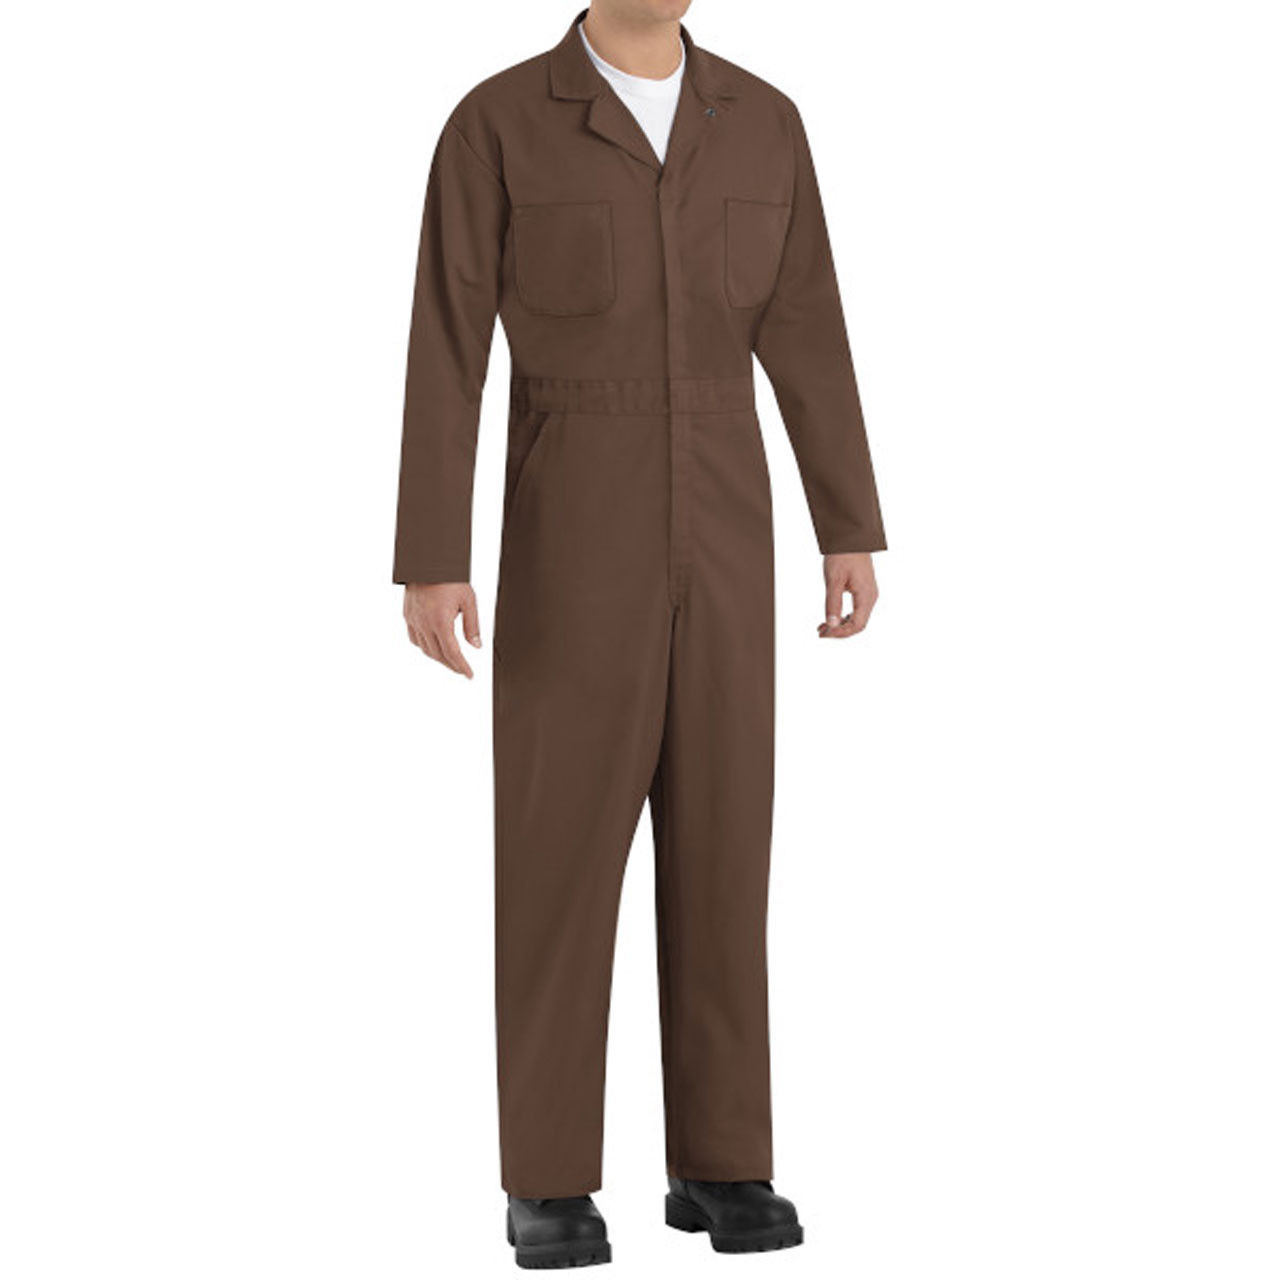 Do the brown coveralls have storage options?